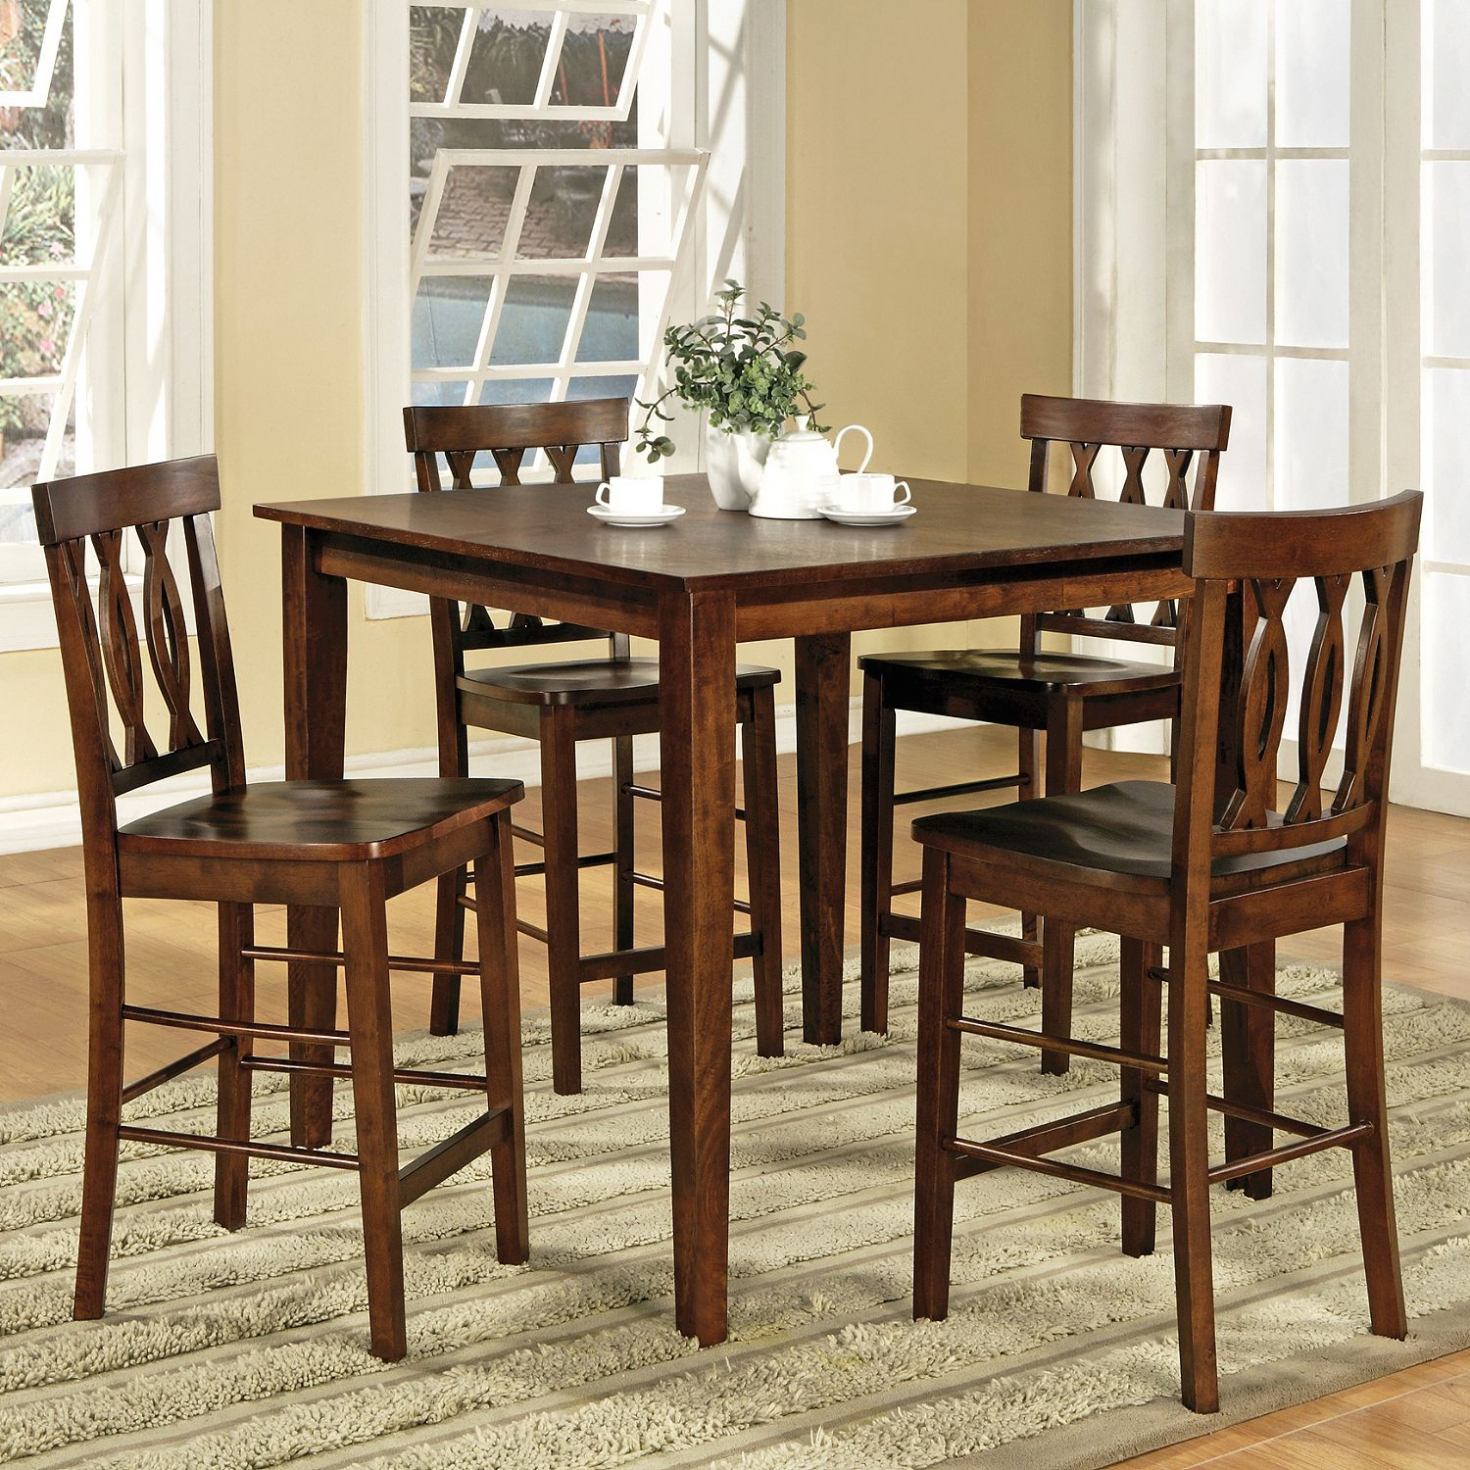 Lovable 5 Piece Dining Set Under 200 Your Home Inspiration with proportions 1470 X 1470